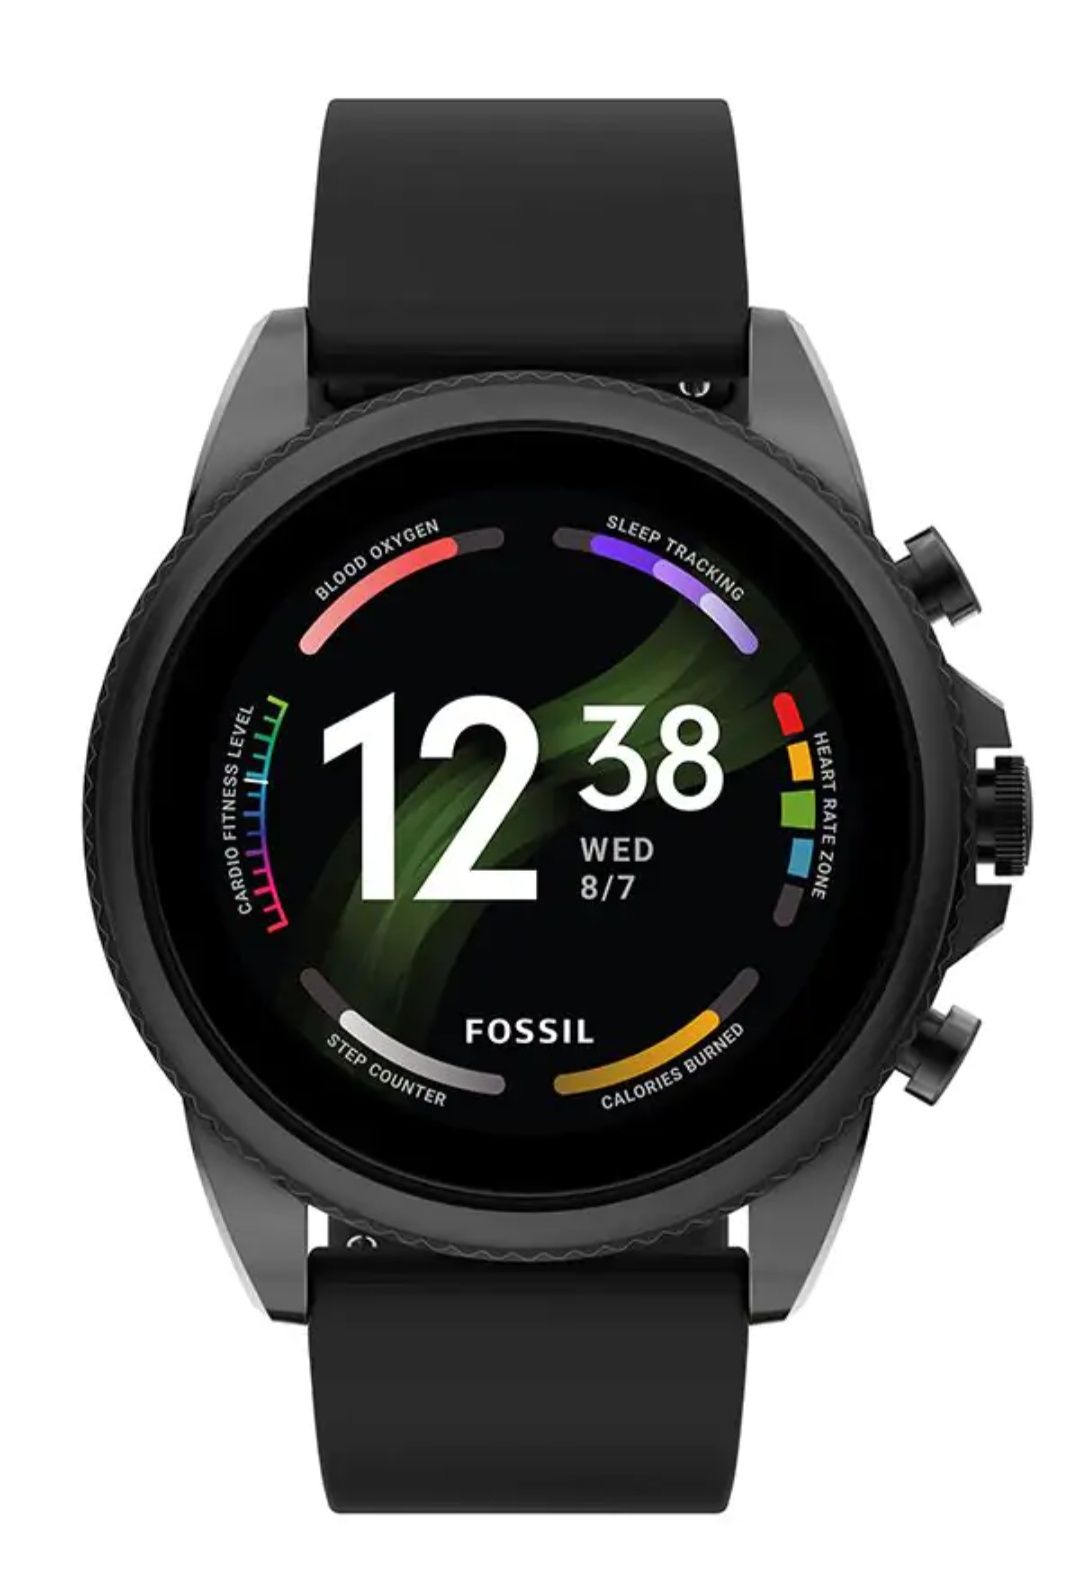 Zegarek smartwatch FOSSIL FTW-4061 Wear OS by Google Android iPhone co